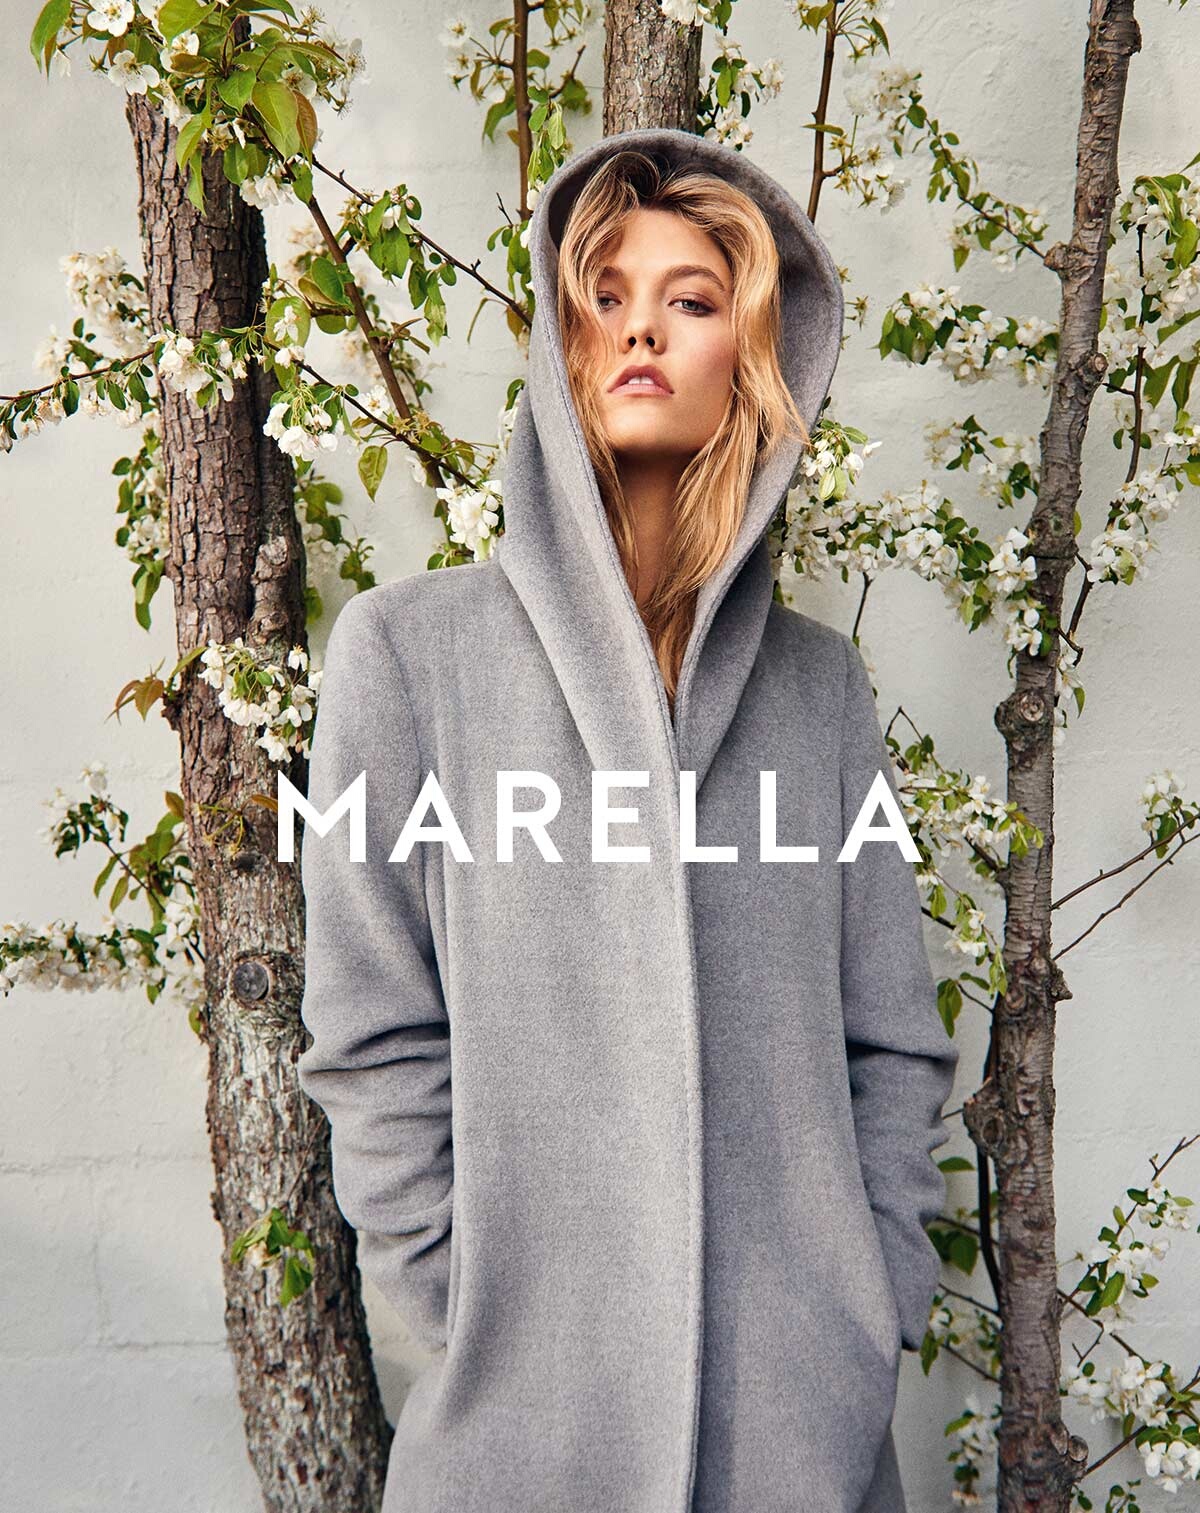 The Essentialist - Fashion Advertising Updated Daily: Marella Ad ...